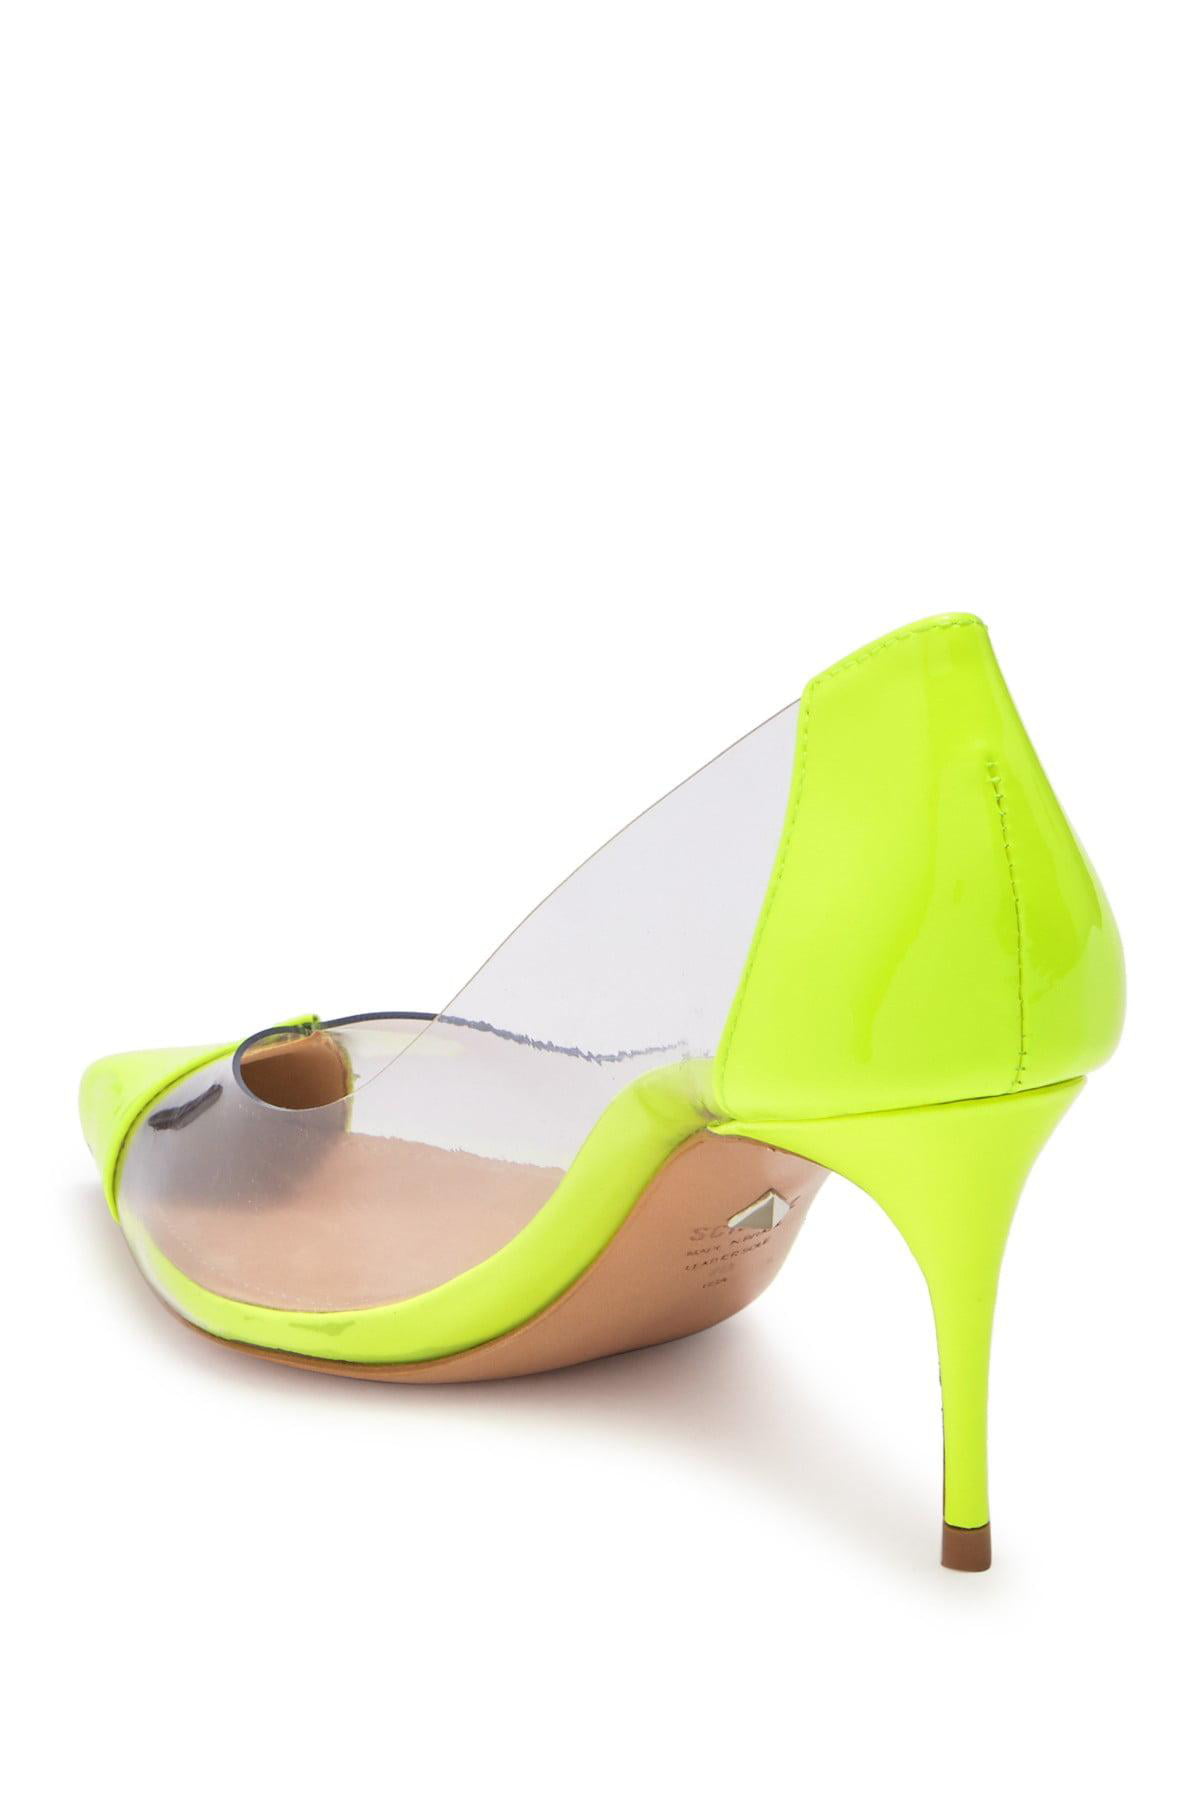 Buy Elisabet Tang High Heels, Womens Pointed Toe Slip on Stilettos Party  Wedding Pumps Basic Shoes (Neon Yellow, 12) at Amazon.in